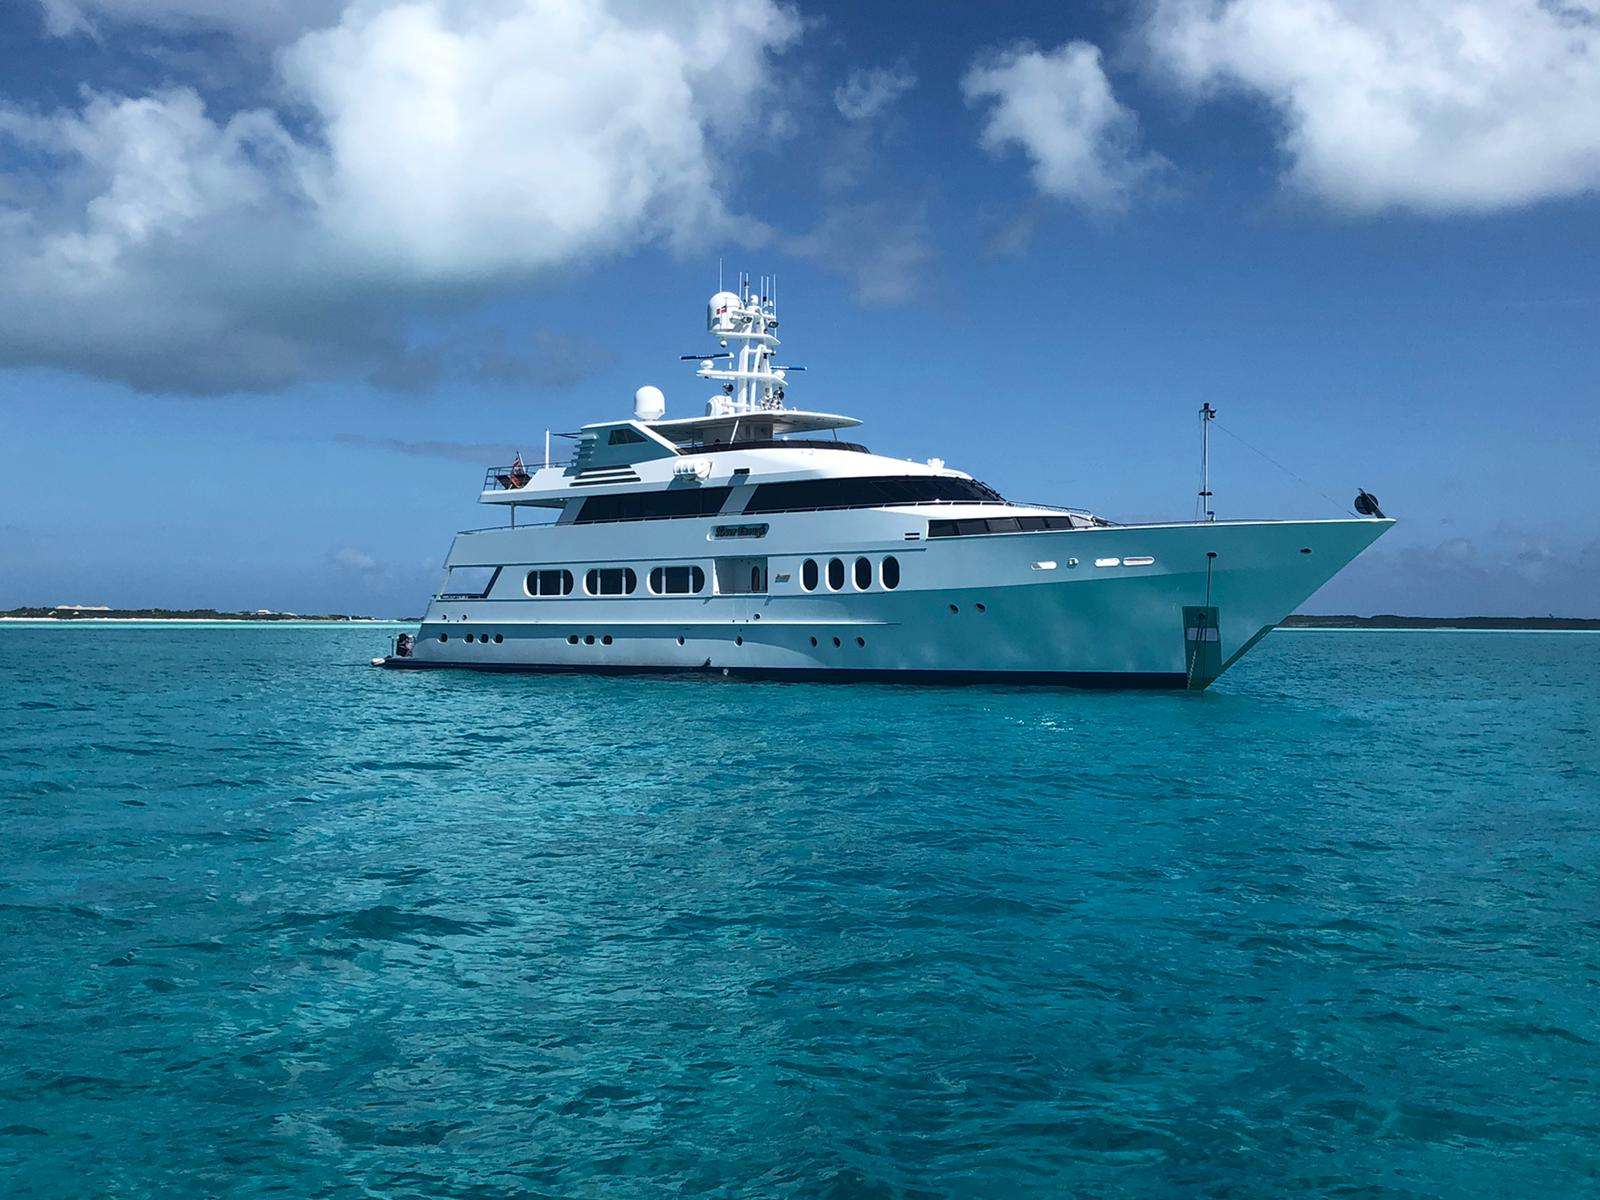 Motor Yacht 'NEVER ENOUGH', 10 PAX, 7 Crew, 140.00 Ft, 42.00 Meters, Built 1992, Feadship, Refit Year 2019